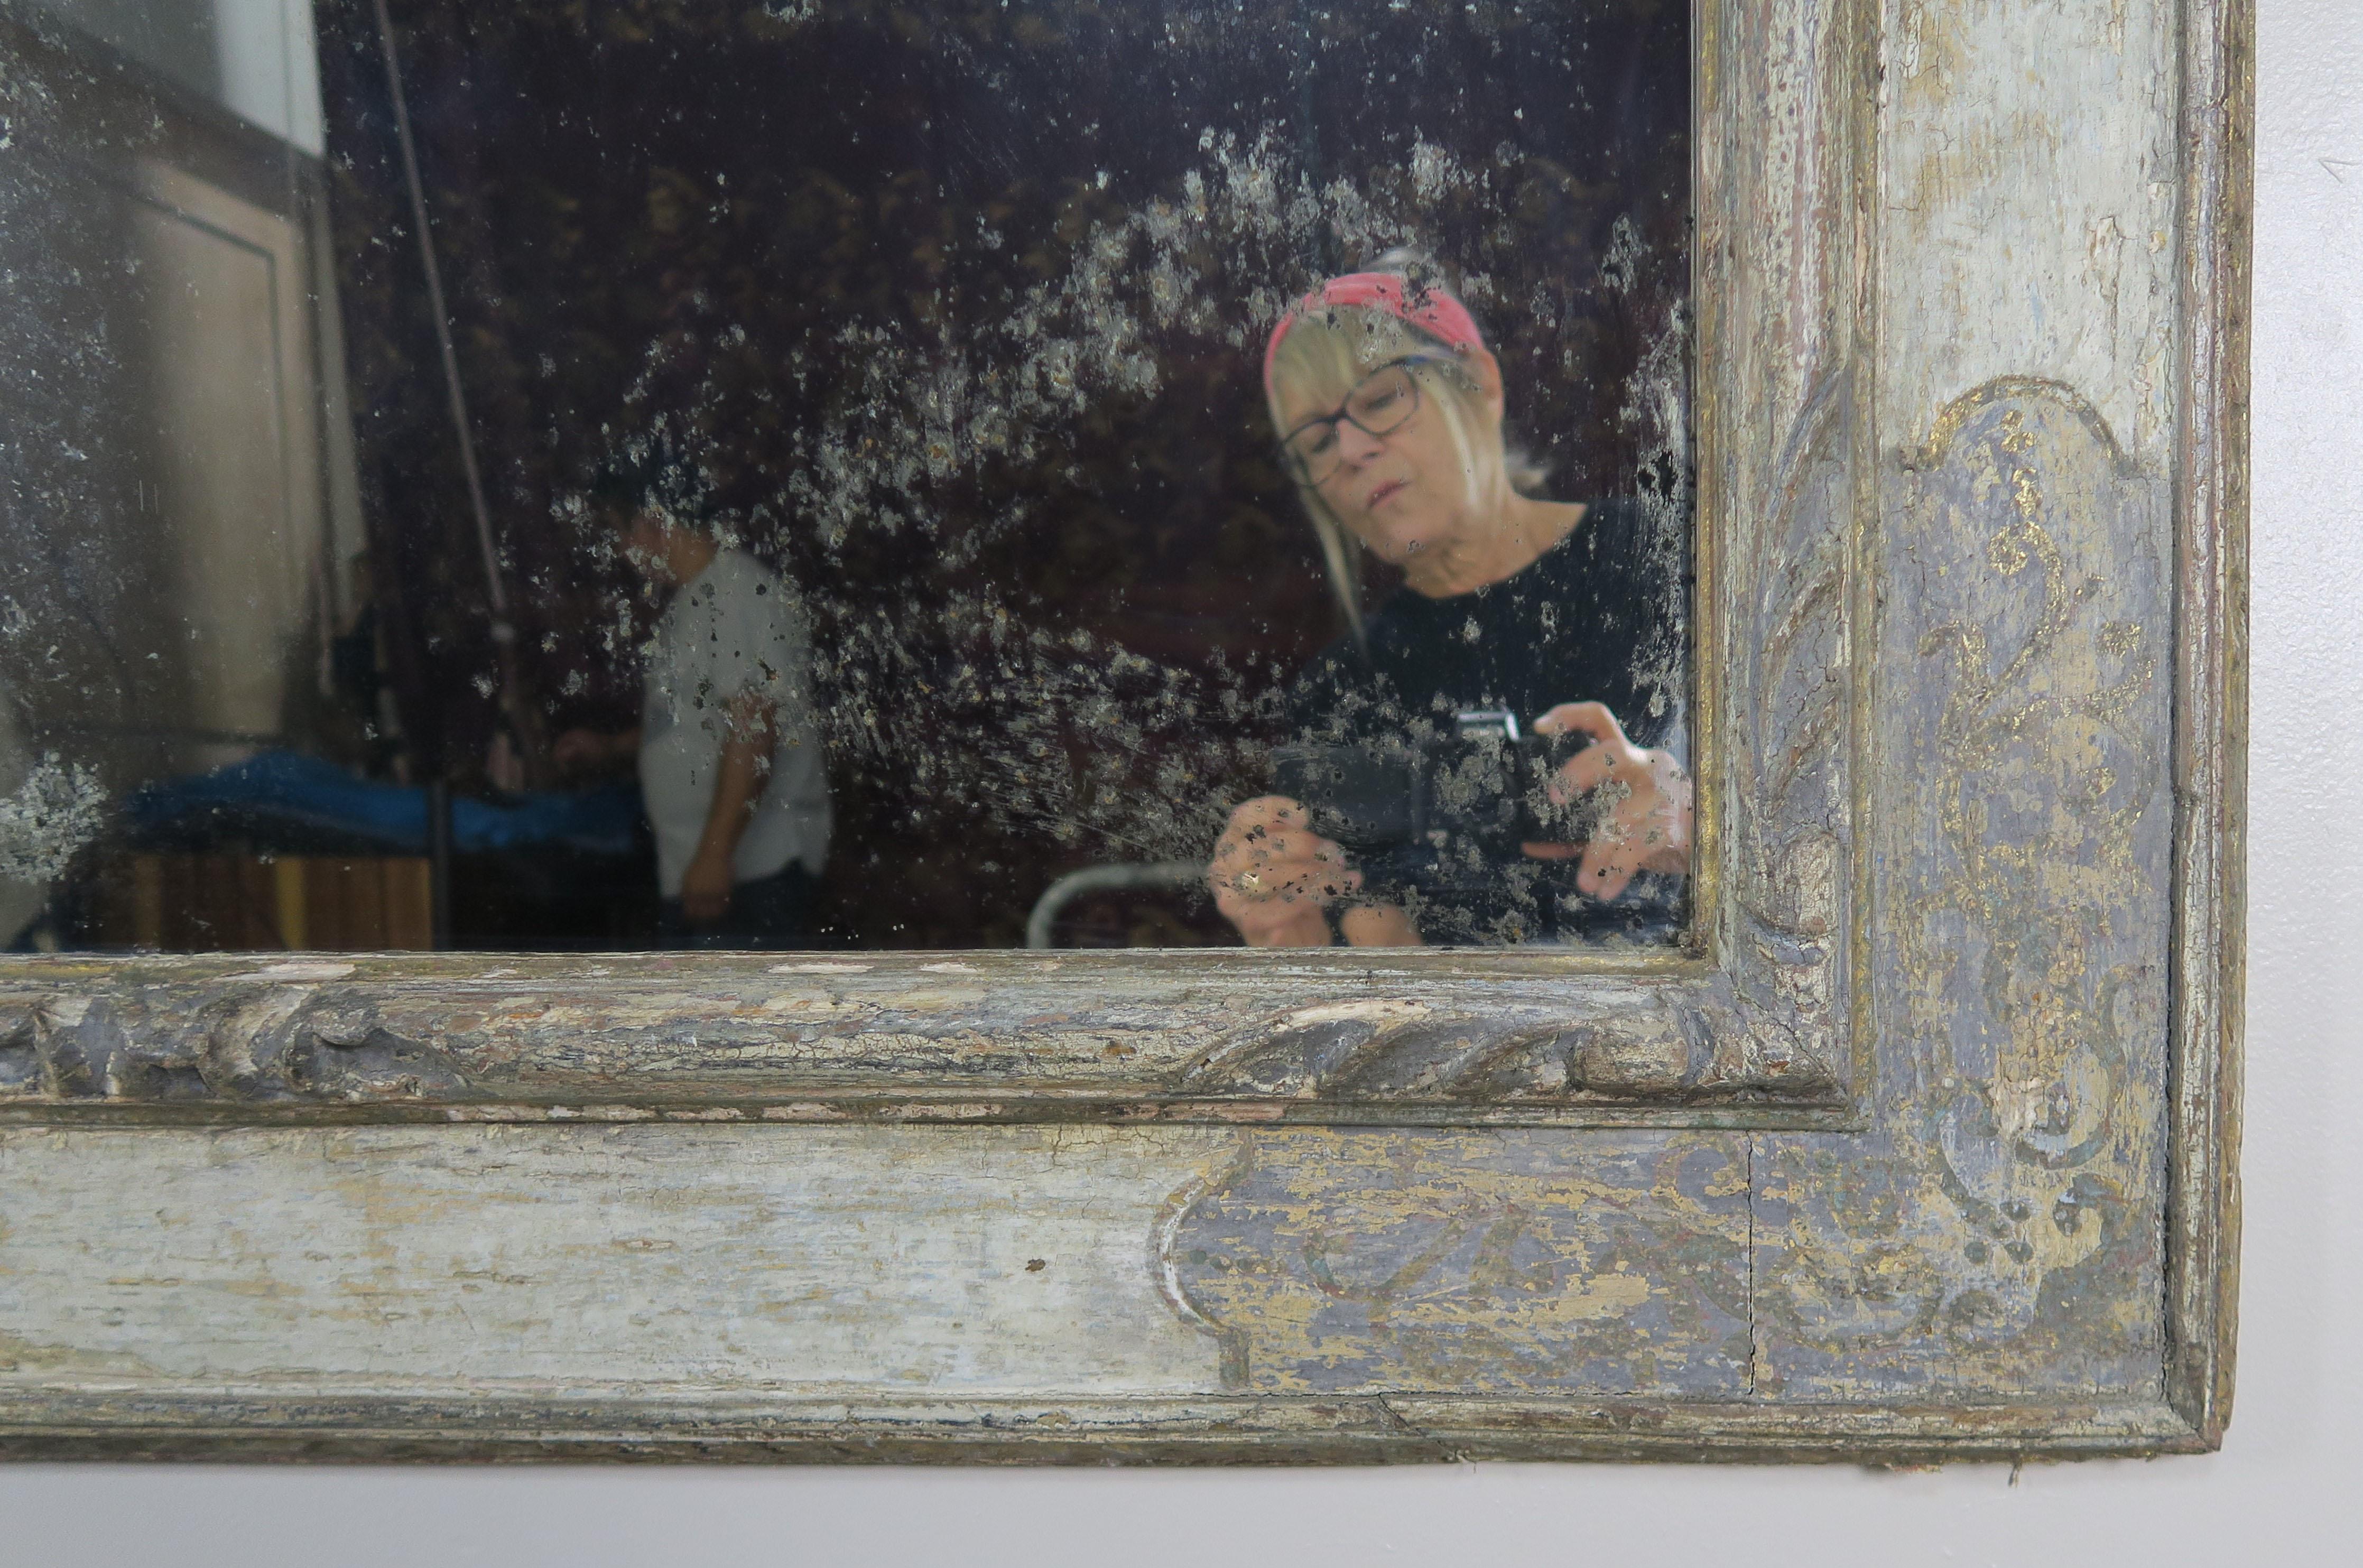 how to paint a mirror frame distressed